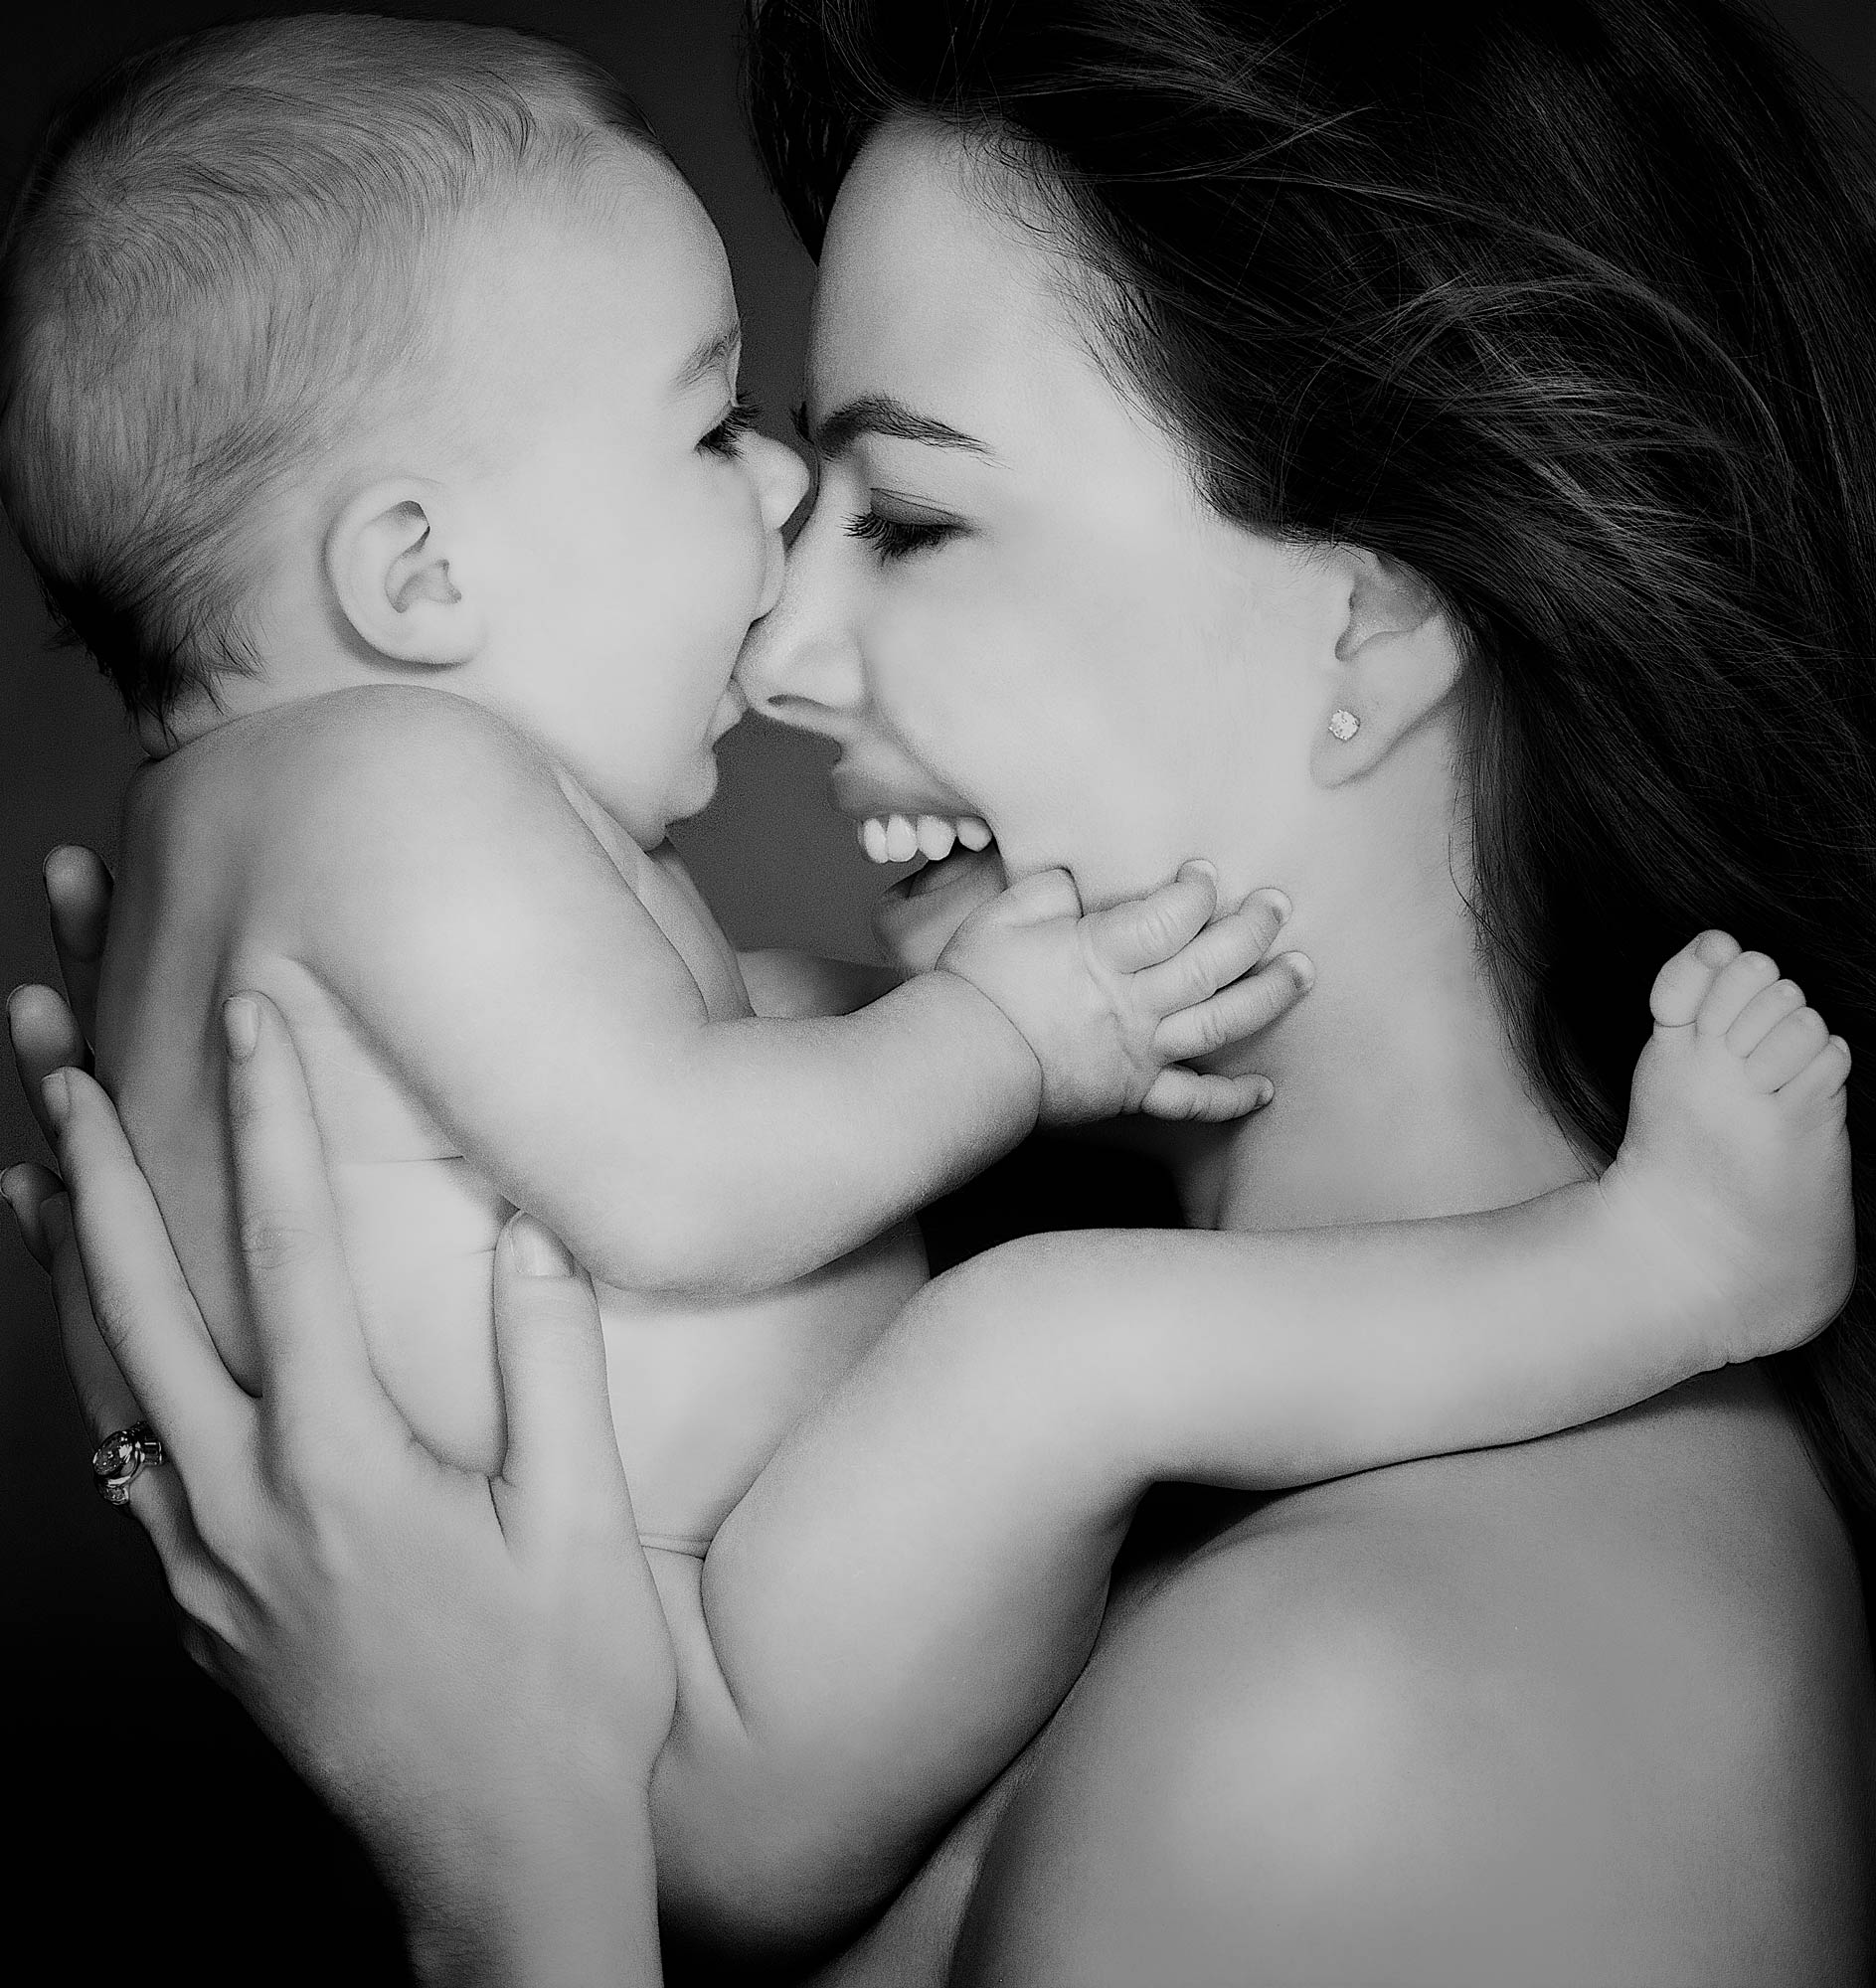 Portrait of Gina Tolleson Thicke with her son Carter Thicke by Benoit Malphettes.  Gina  is an American model and beauty queen who was crowned Miss World America 1990 and also Miss World 1990